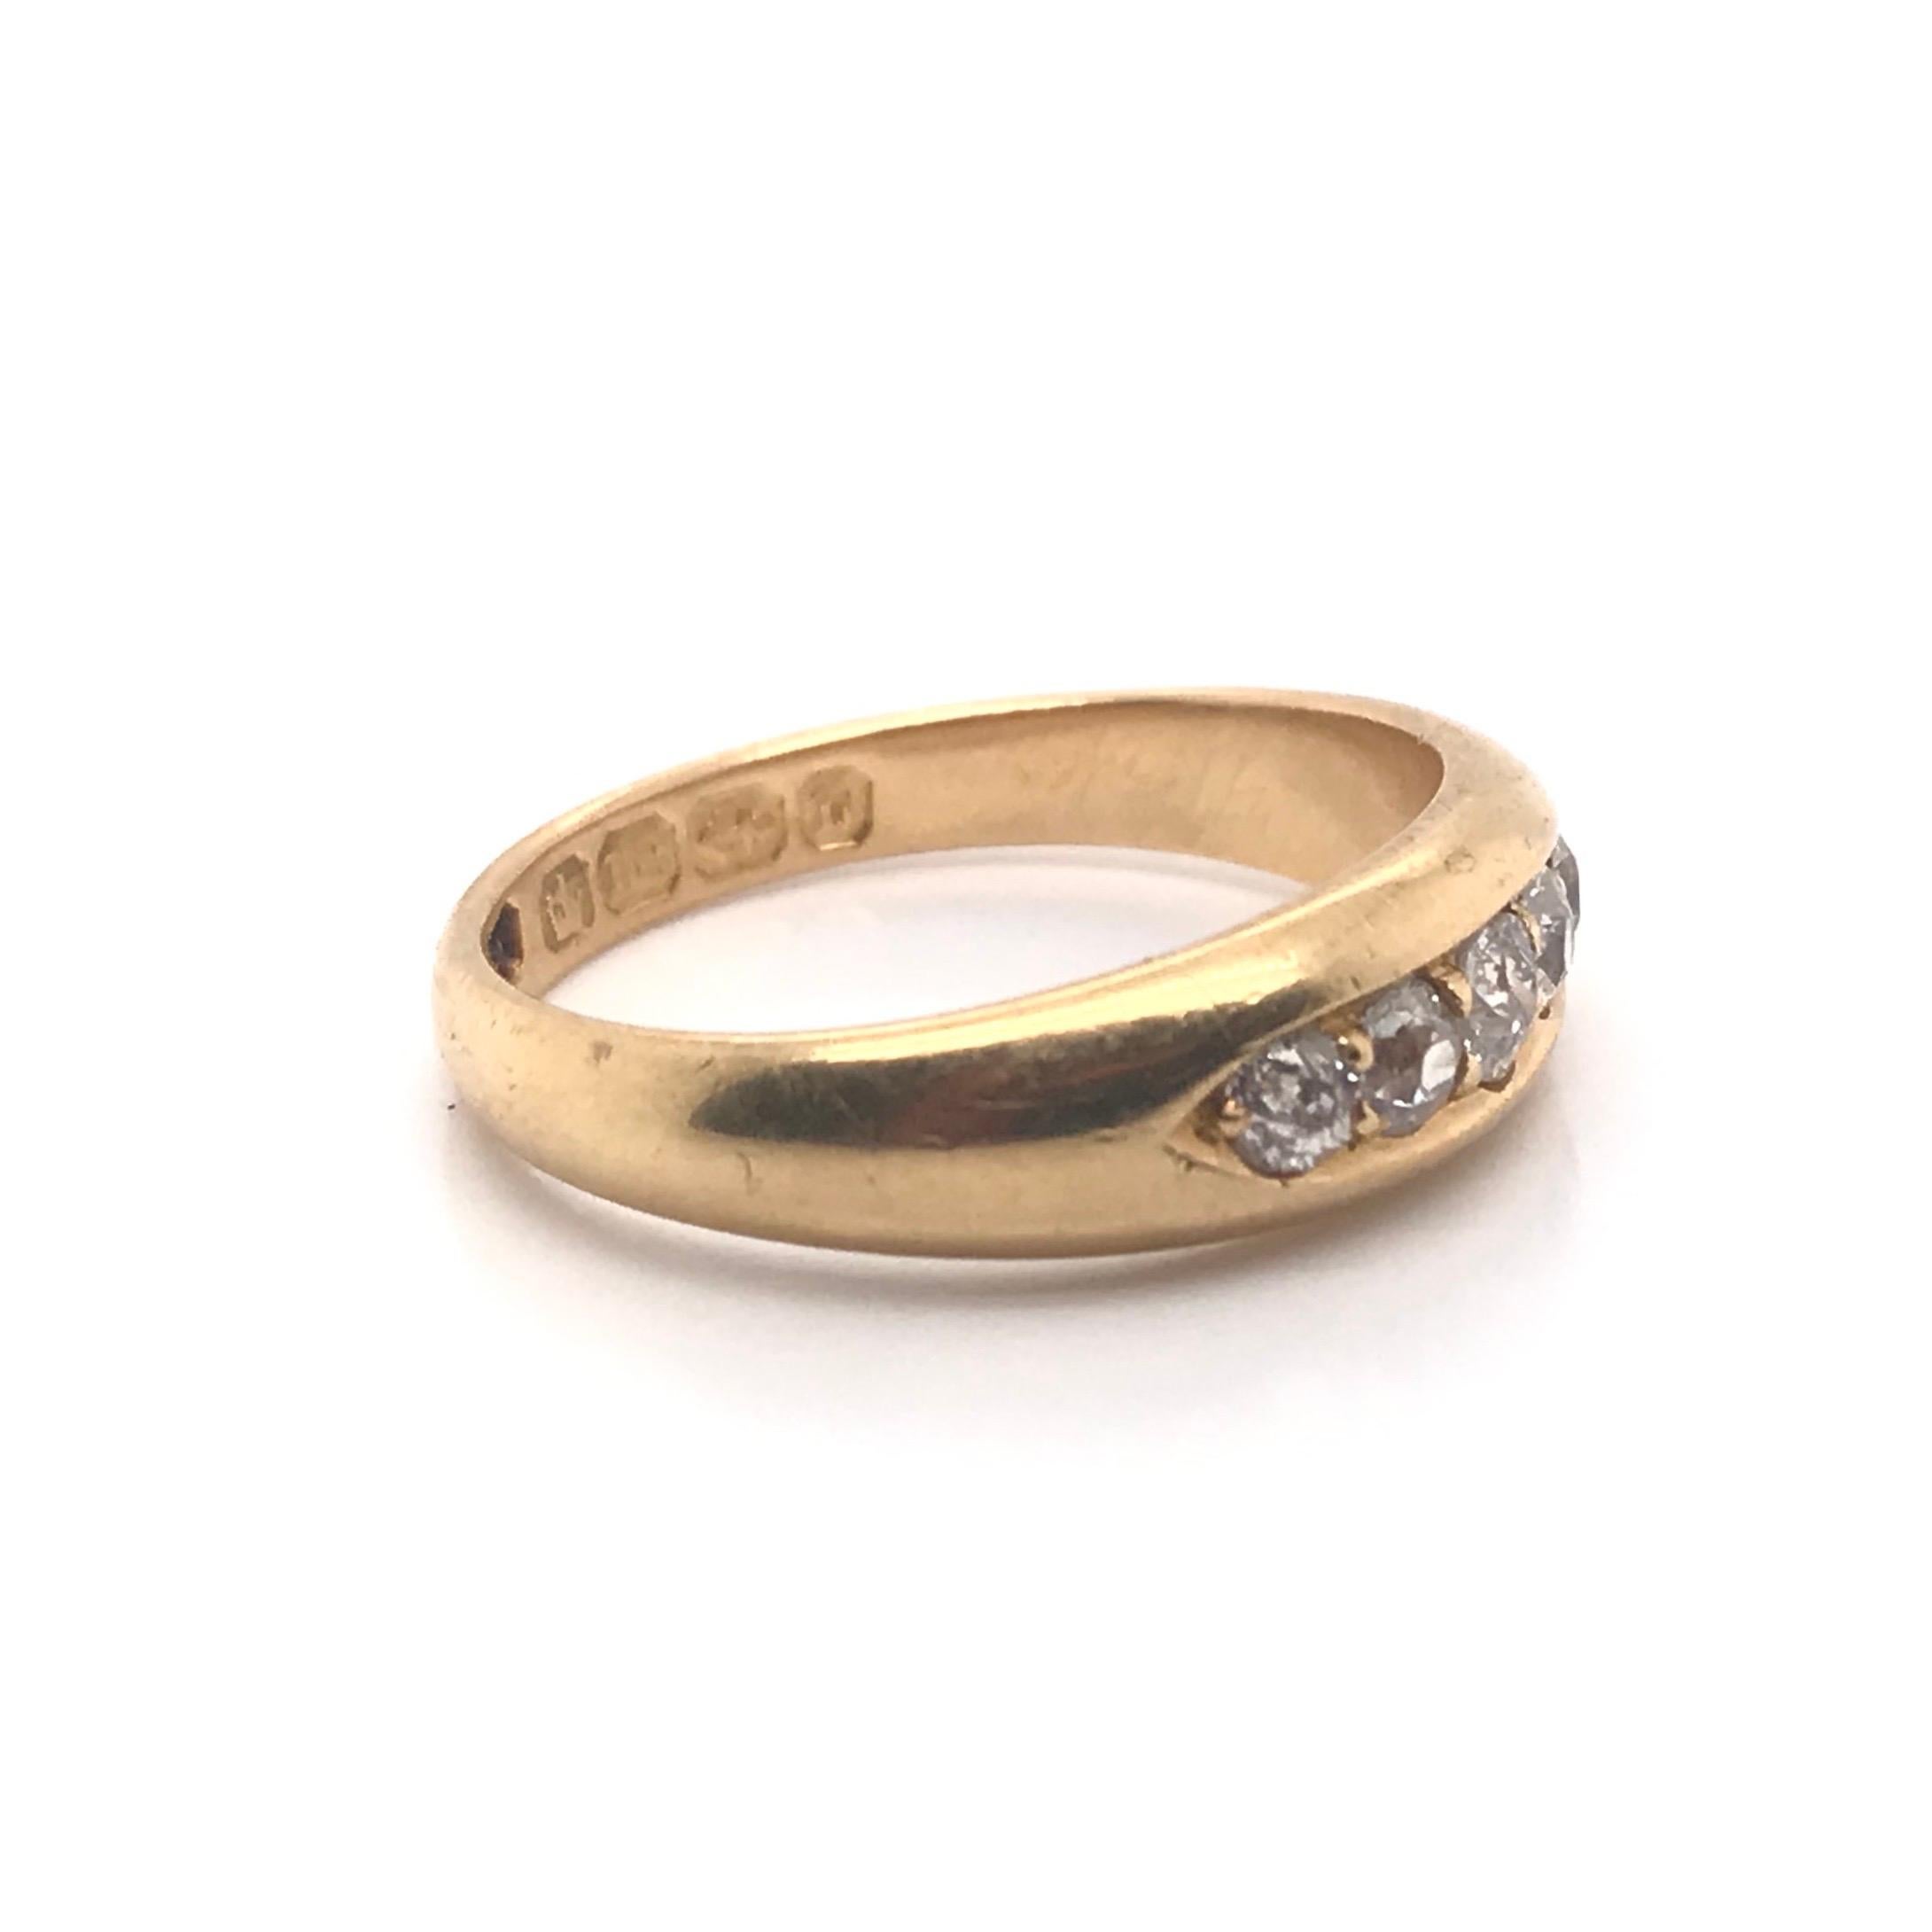 We love hallmarked jewelry! Little stamps inside of this ring tell us a story. They tell us where it was made, when it was made, and who made it.

The markings in this ring read:

L&L, the jewelry company that produced this gorgeous ring.
Crown,